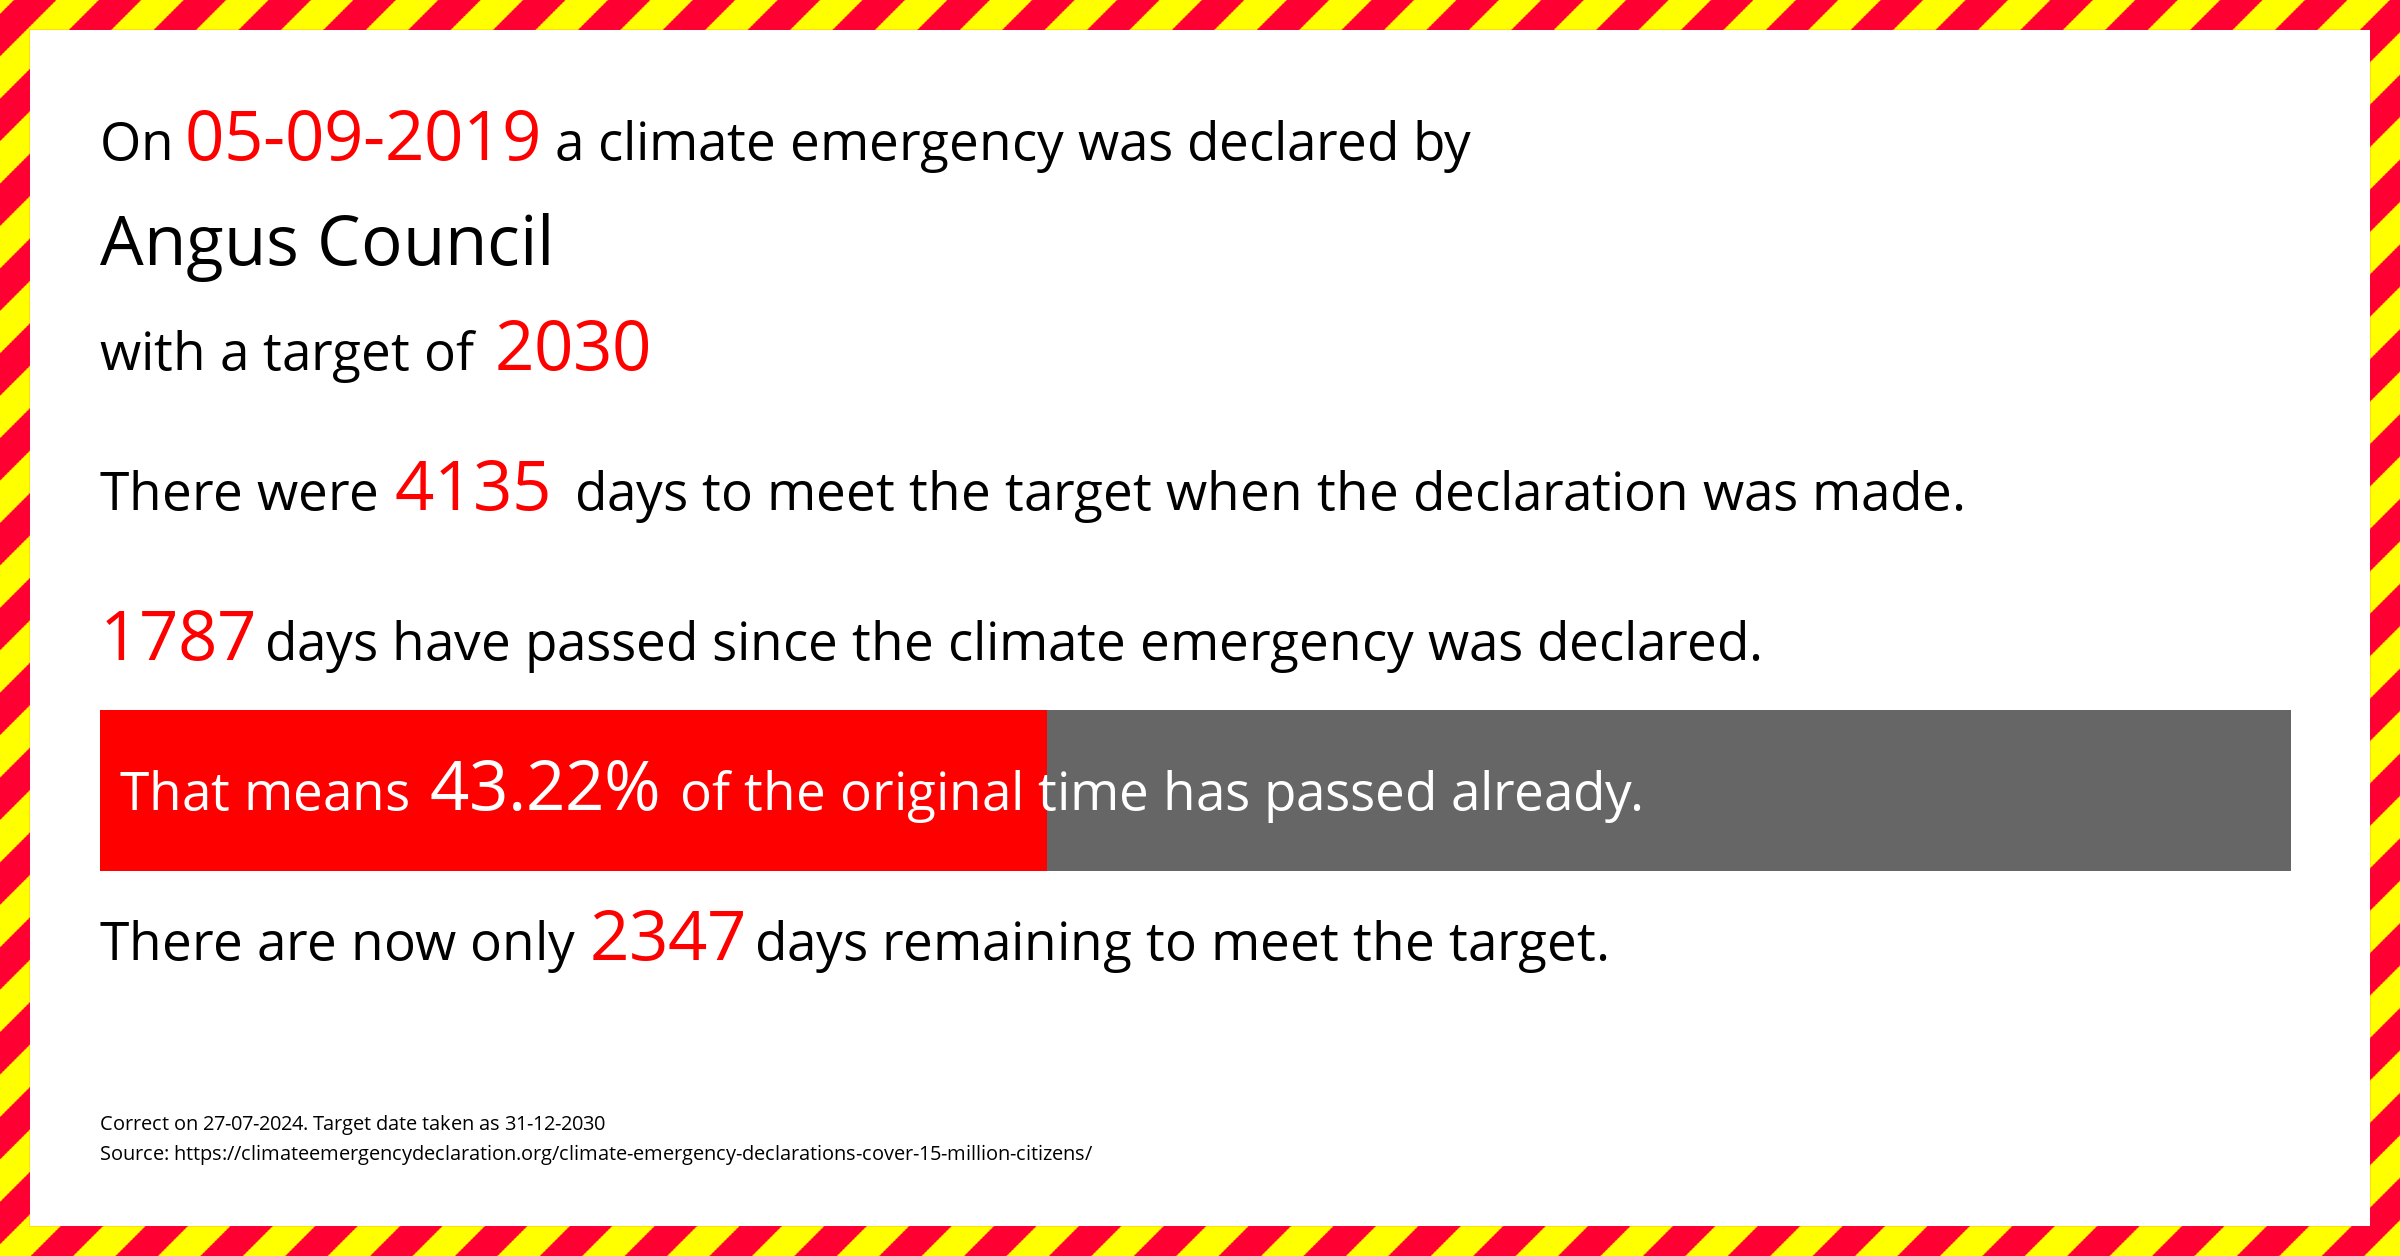 Angus Council declared a Climate emergency on Thursday 5th September 2019, with a target of 2030.